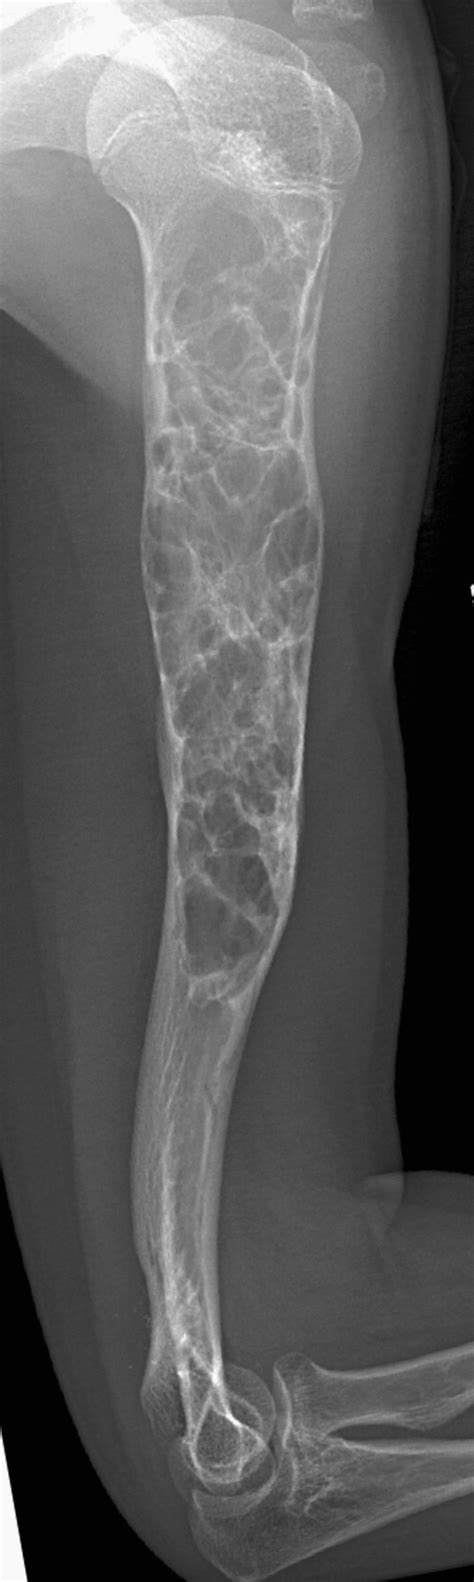 Successful Treatment Of Humeral Giant Aneurysmal Bone Cyst Value Of